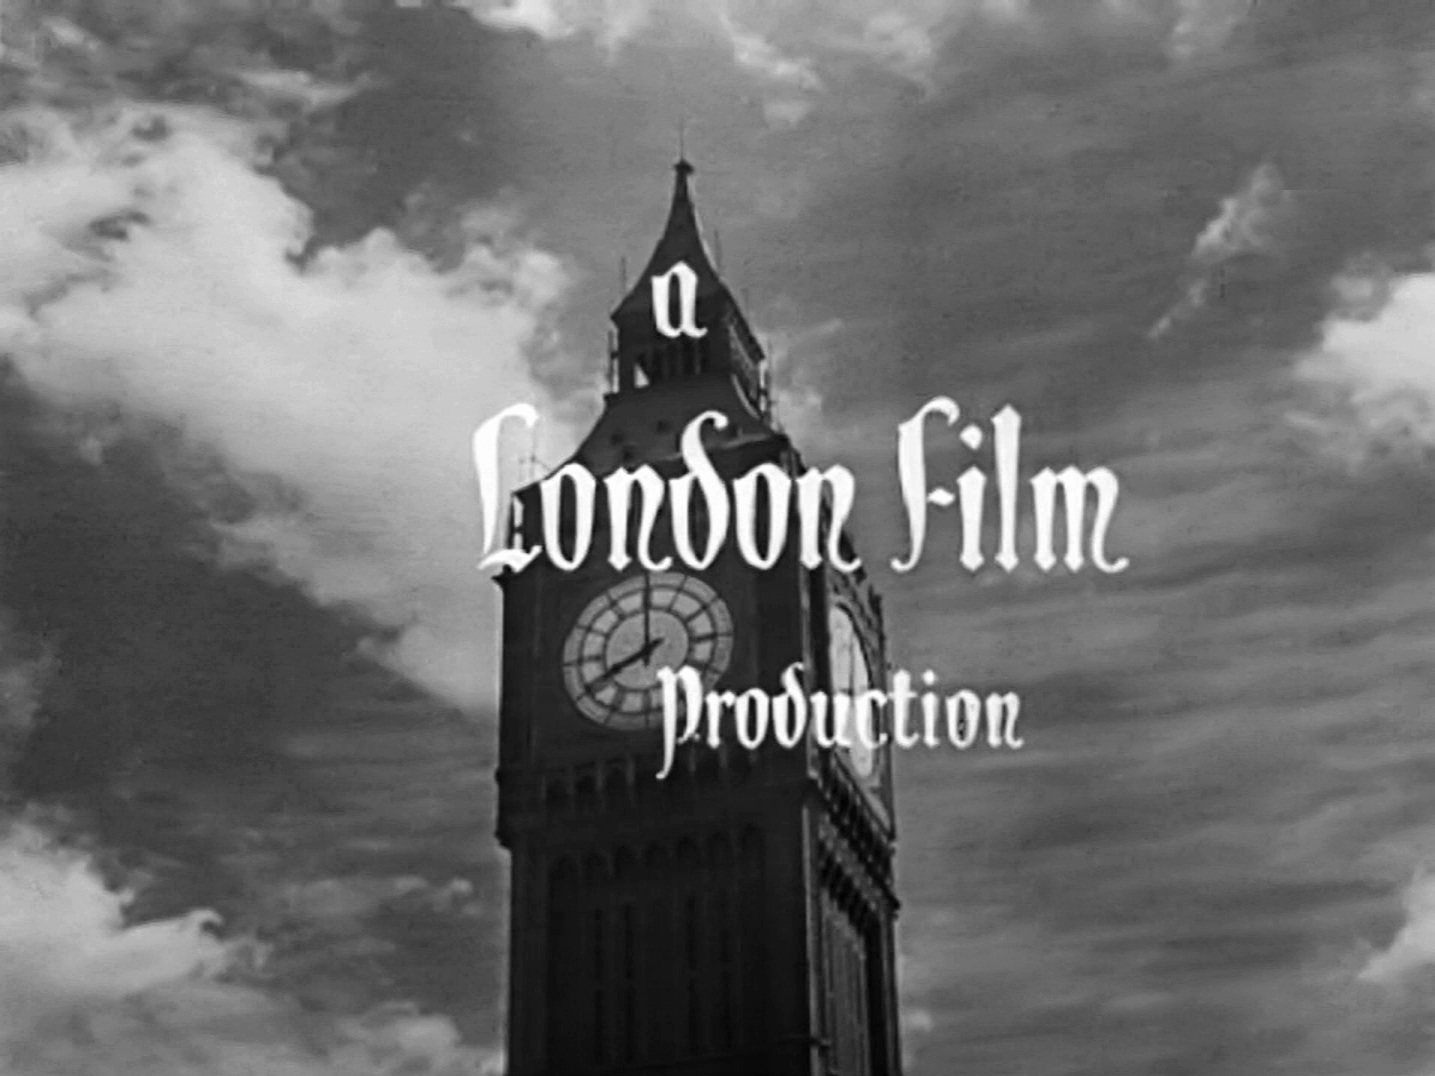 Main title from The Scarlet Pimpernel (1934) (1). A London Film production